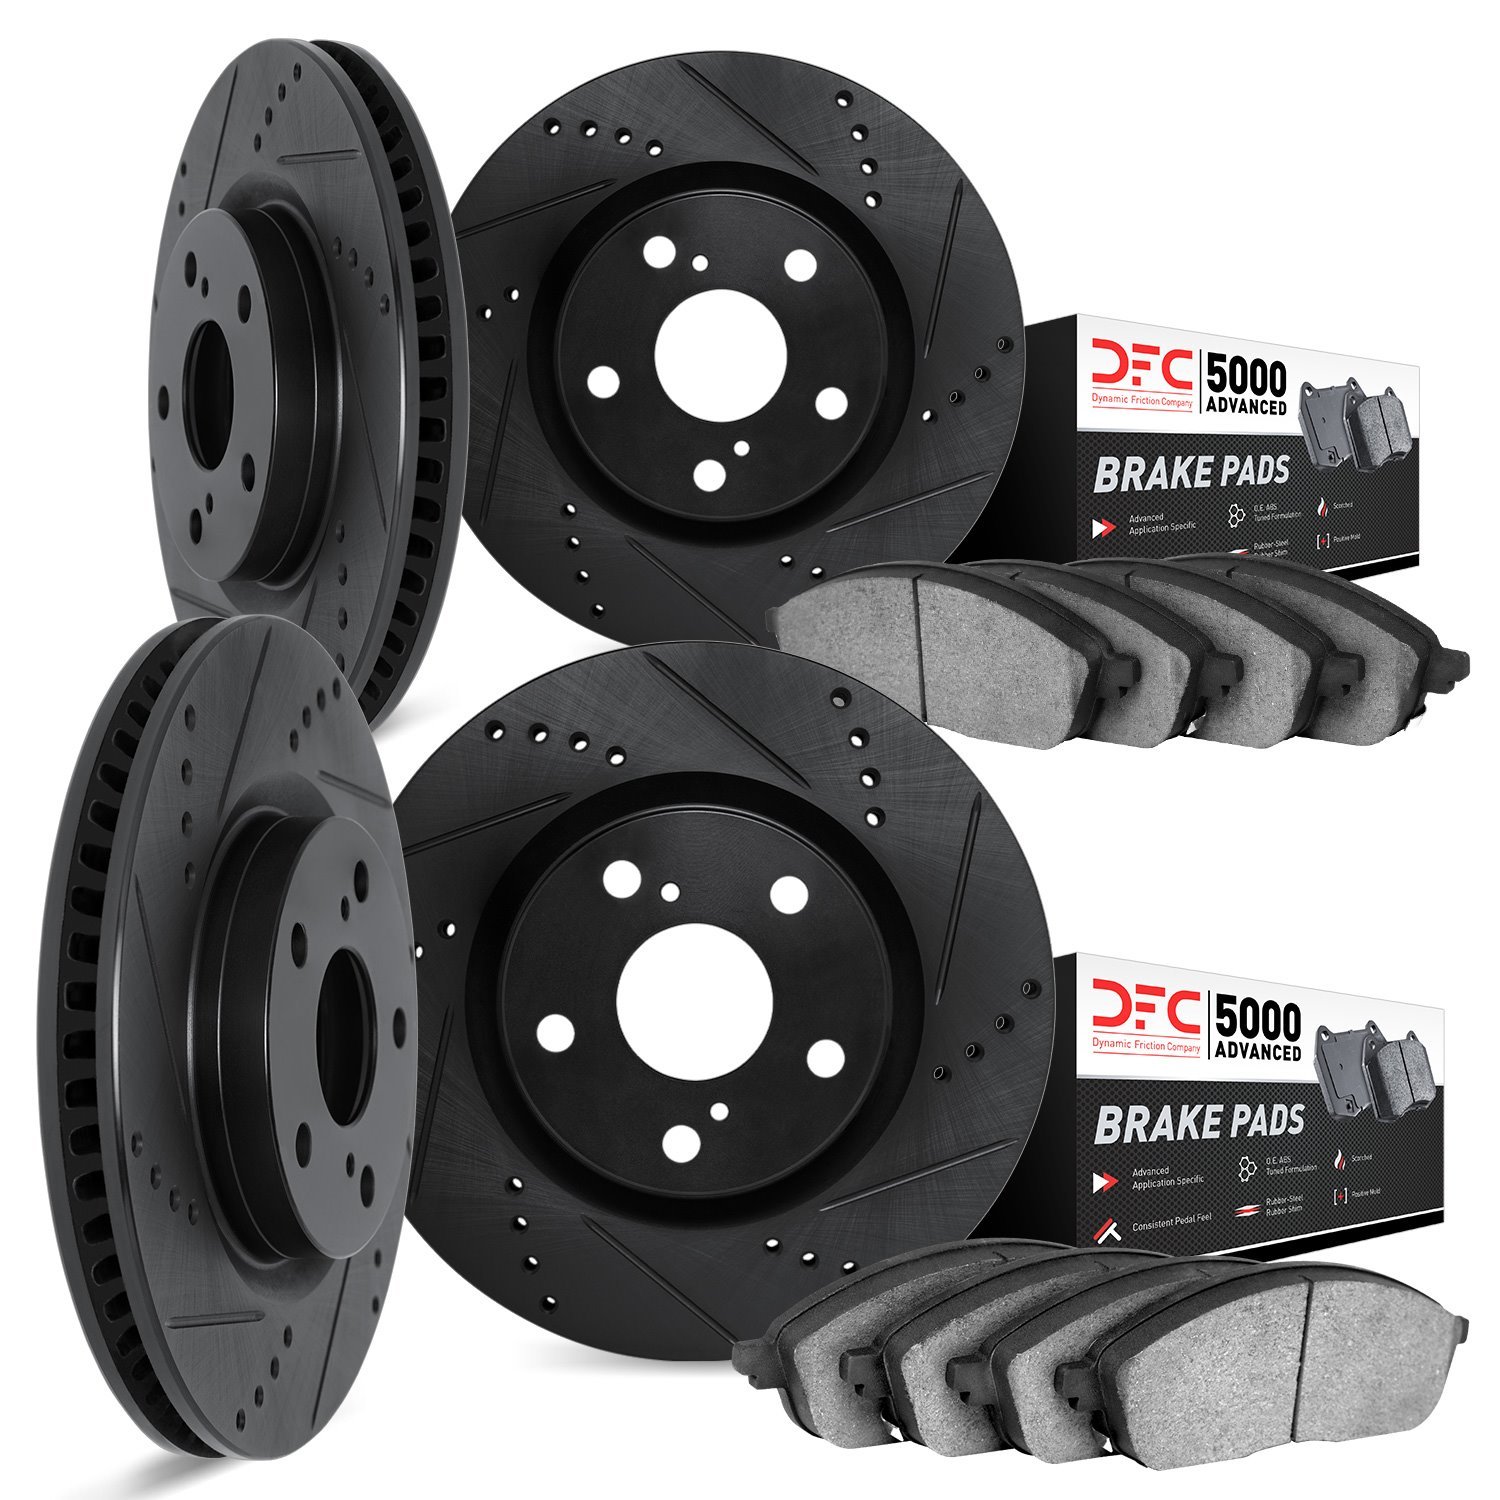 8504-52028 Drilled/Slotted Brake Rotors w/5000 Advanced Brake Pads Kit [Black], 1988-1988 GM, Position: Front and Rear